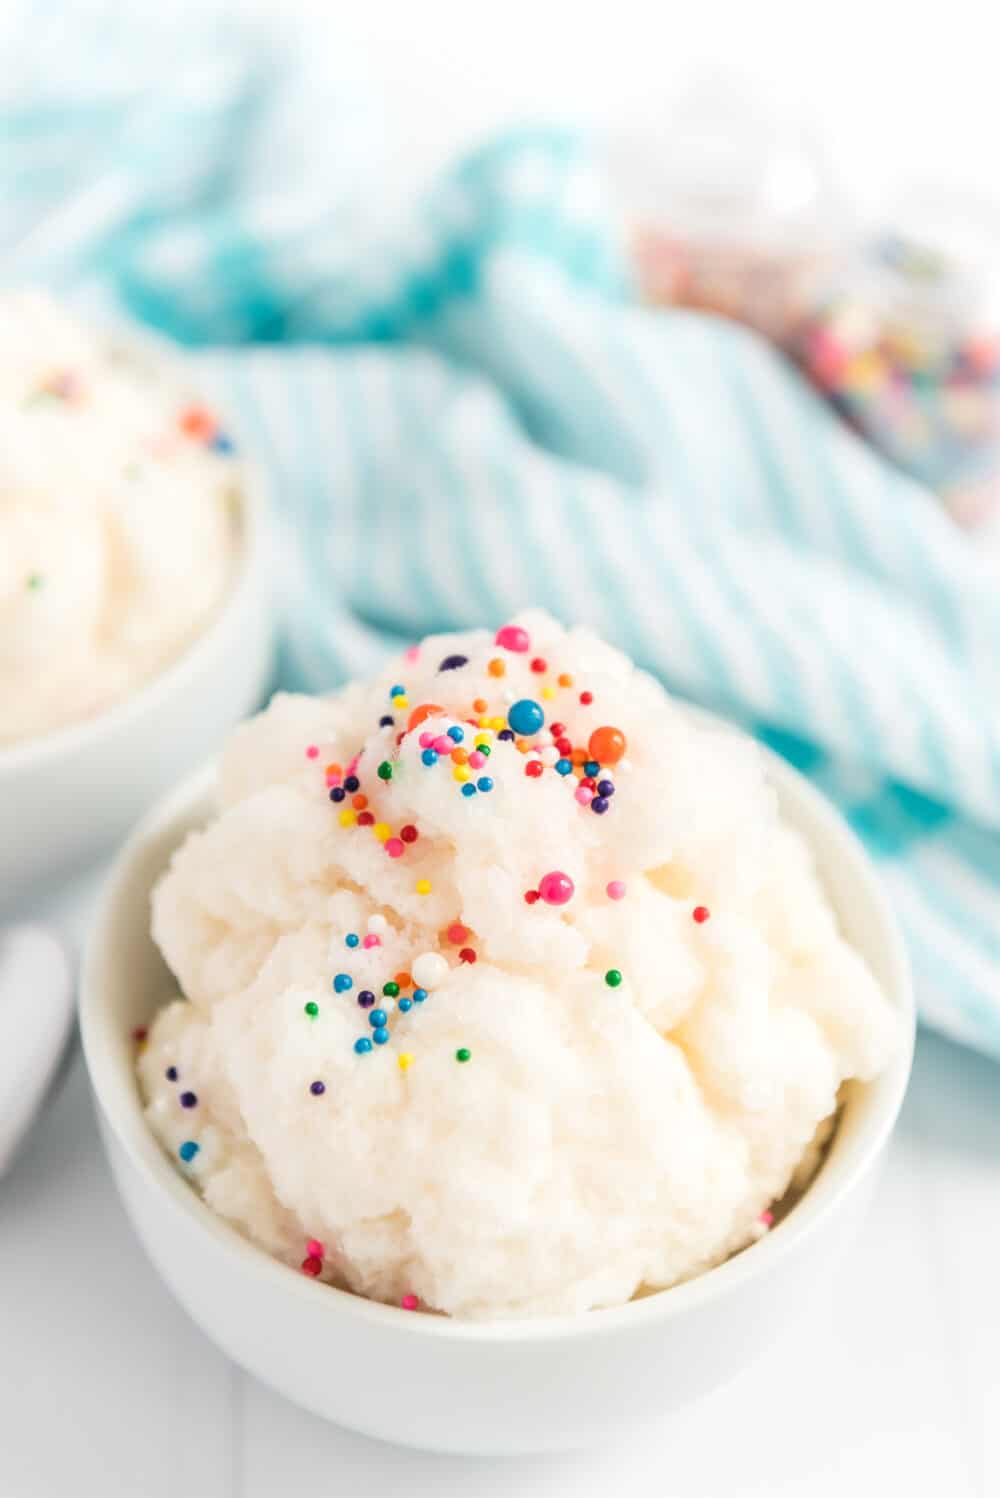 snow ice cream in a dish with colored sprinkles.